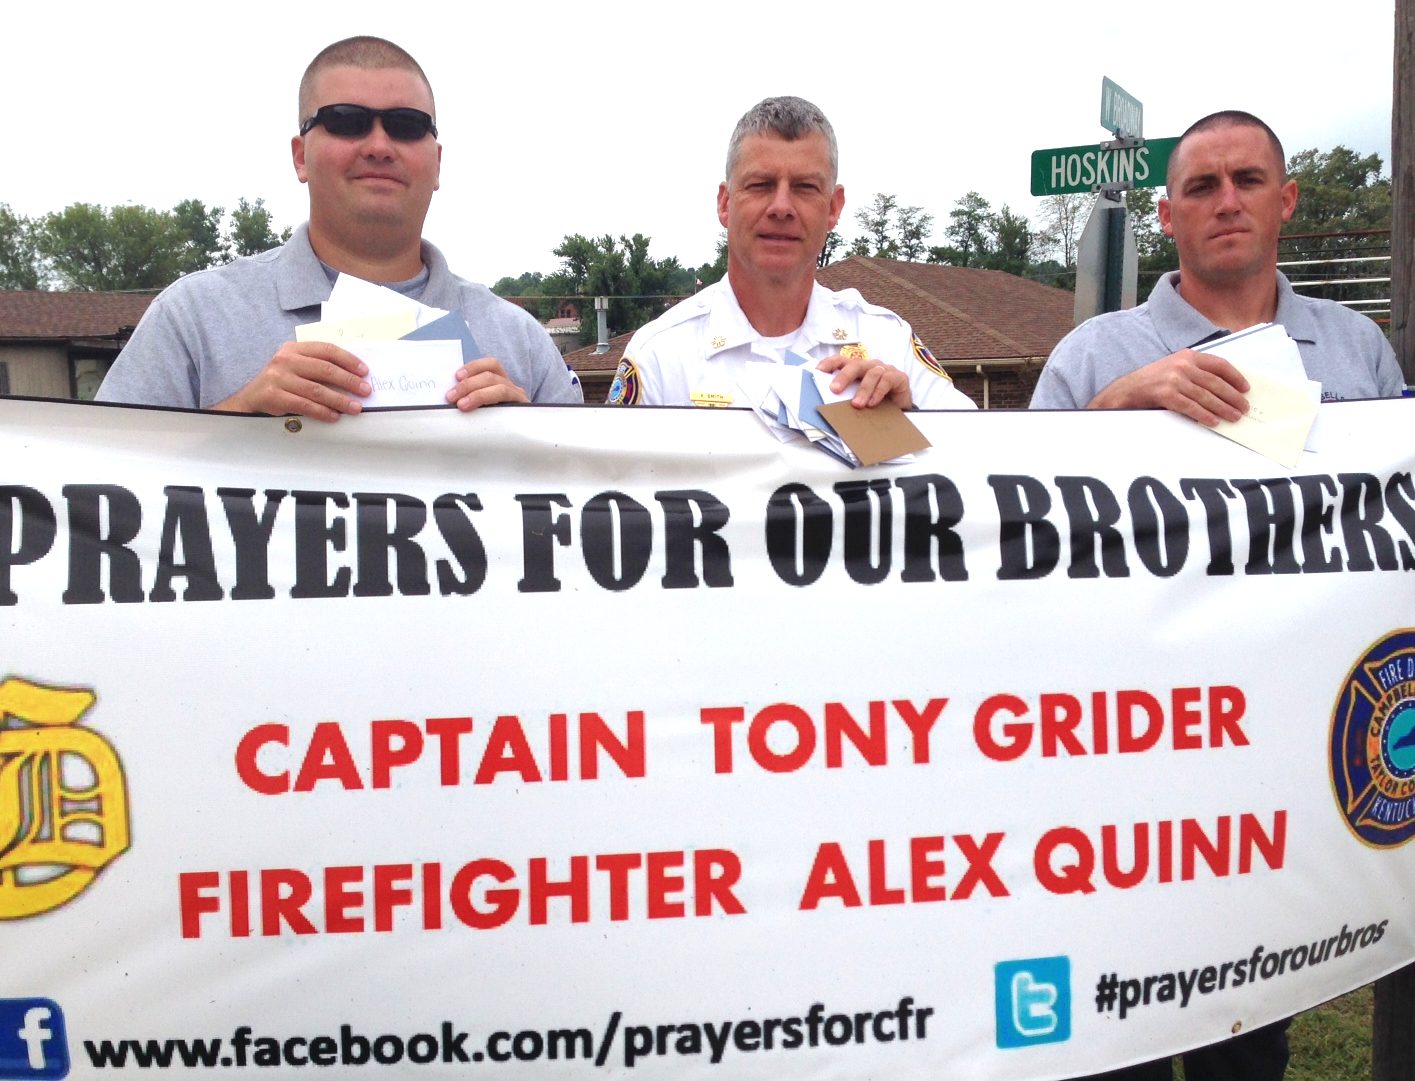  Campbellsville University Student Services hosted a card signing event for the injured firefighters so students could send their get well messages and good wishes. Above, holding a few of the cards behind the prayer request banner, are the Taylor County firemen who will take those messages to Captain Tony Grider and Alex Quinn in their evening trip to the hospital. From left are: Captain Chris Taylor, Chief Kyle Smith, and firefighter Aaron Fields. Grider and Quinn are reported to be making small positive steps with a long journey ahead of them. (Campbellsville University Photo by Linda Waggener) 